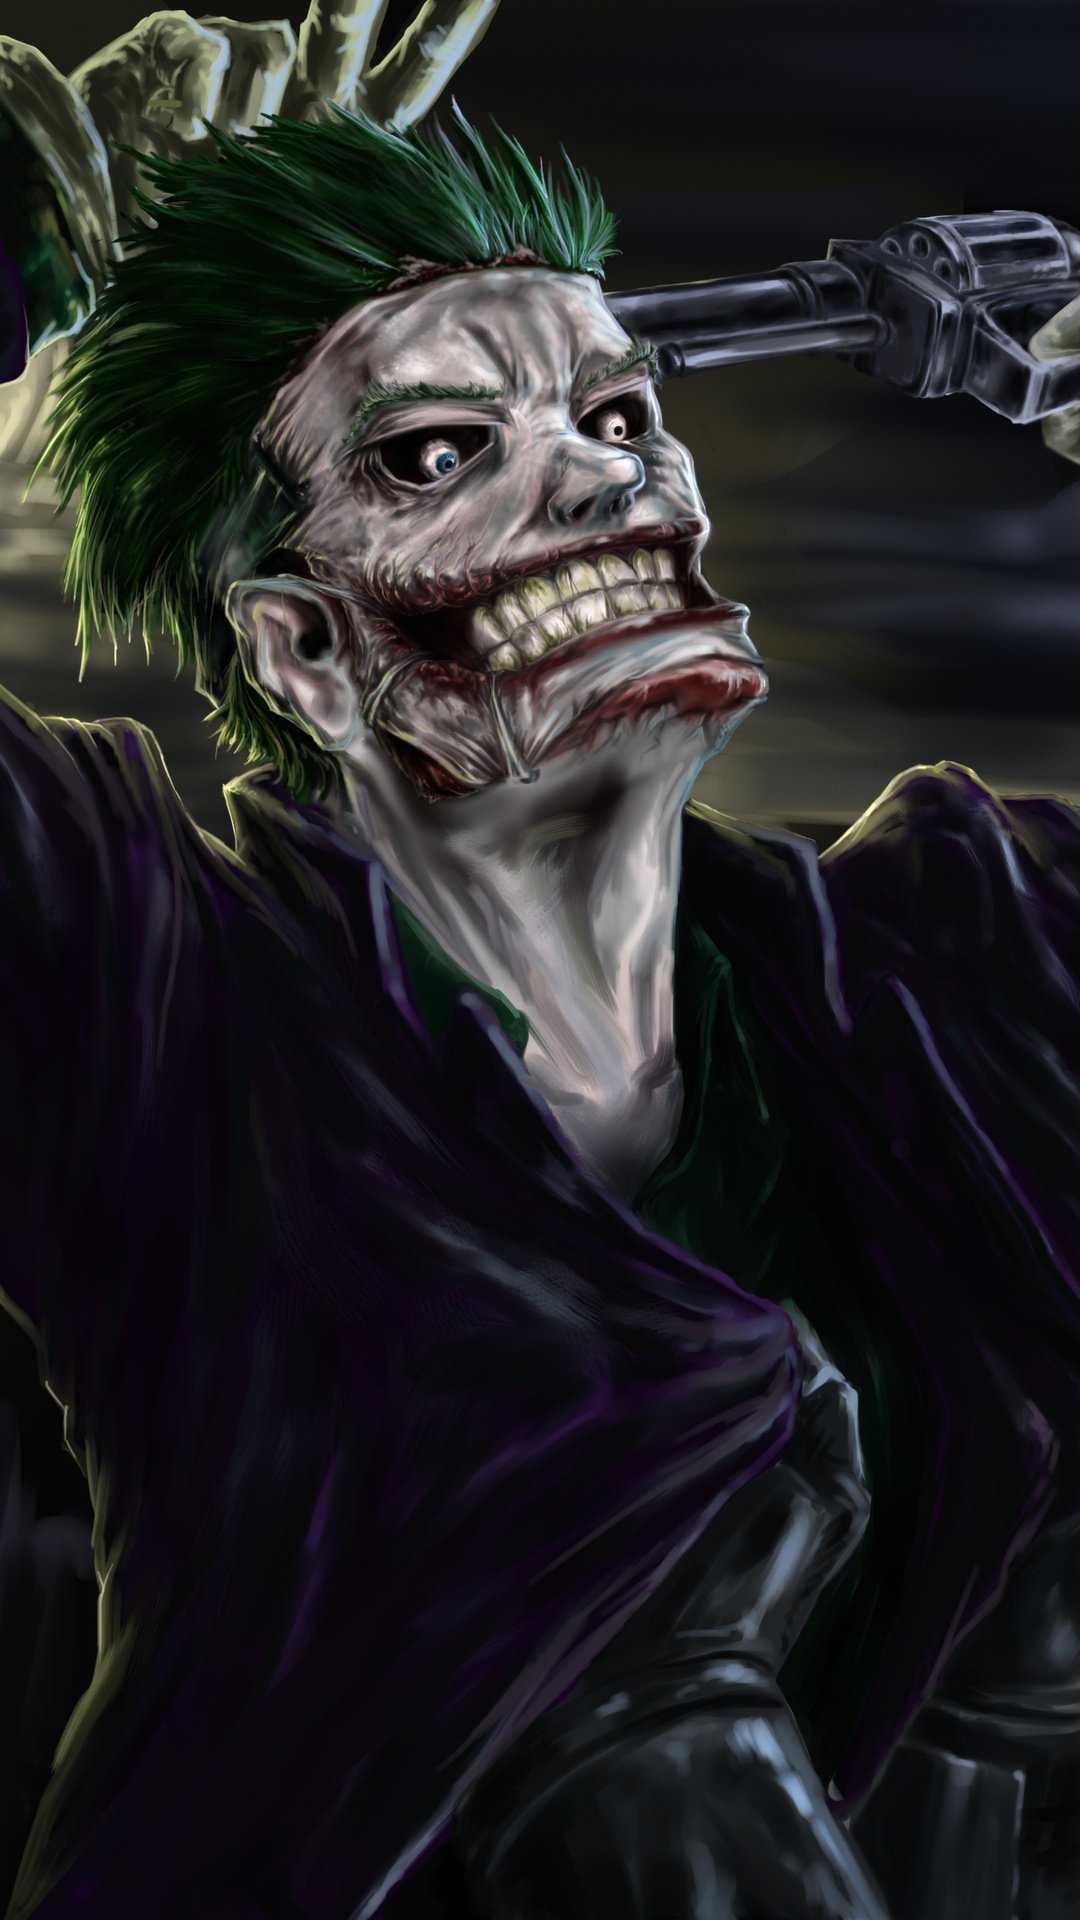 The Joker 4k Android Wallpapers - Wallpaper Cave